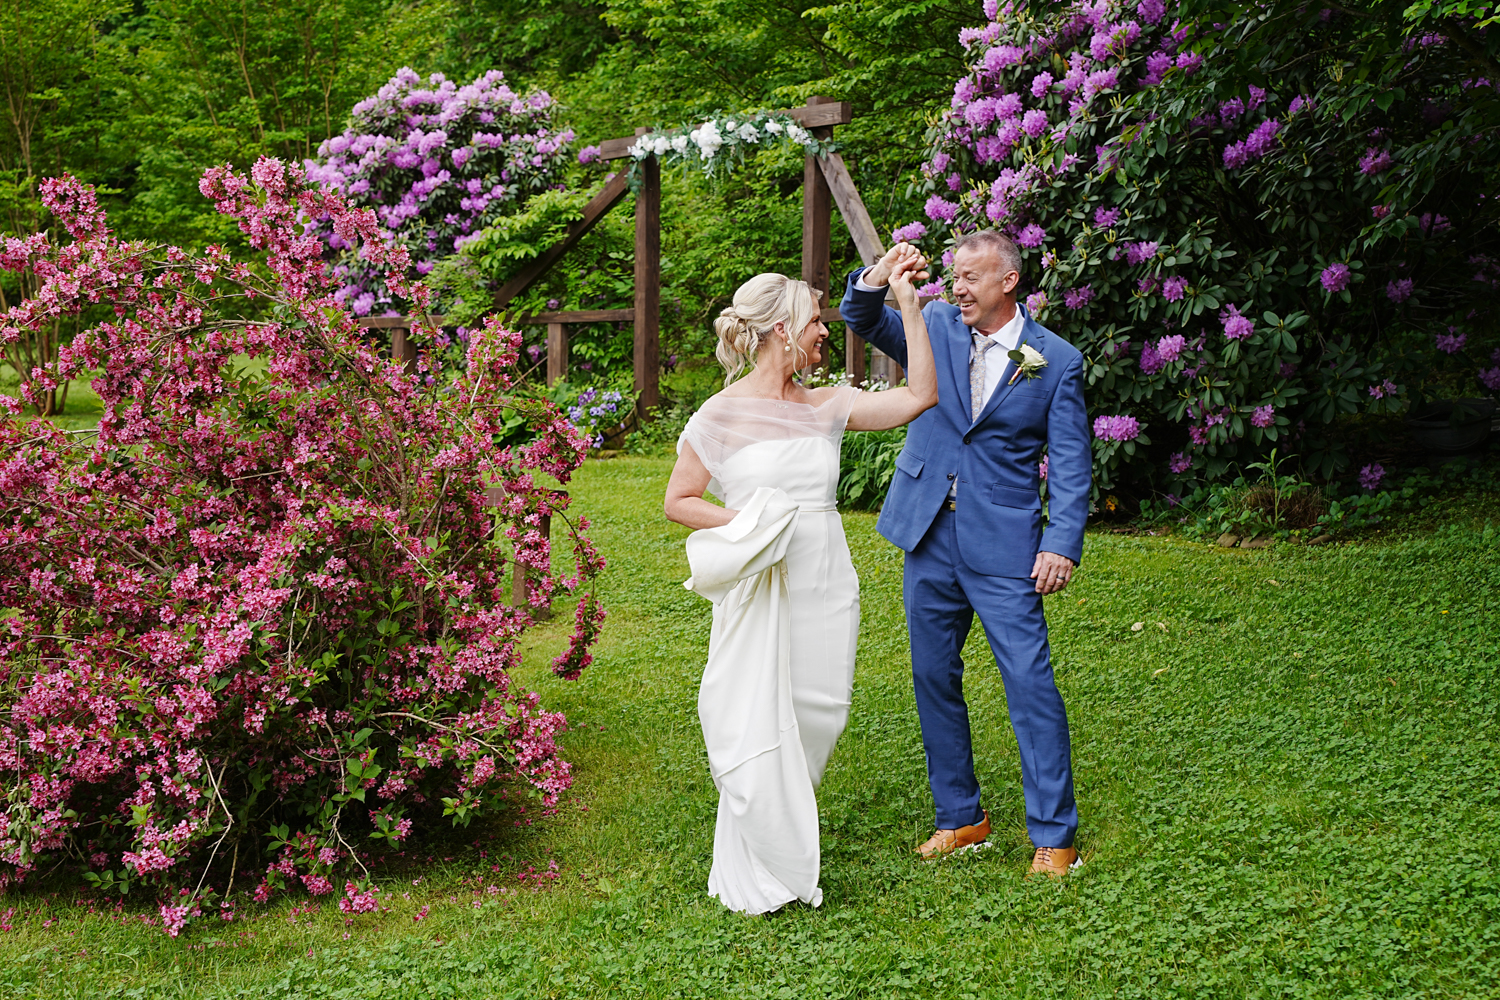 Bride dancing with her groom in a spring garden of pink blooming bushes at the Honeysuckle Hills wedding venue in Pigeon Forge